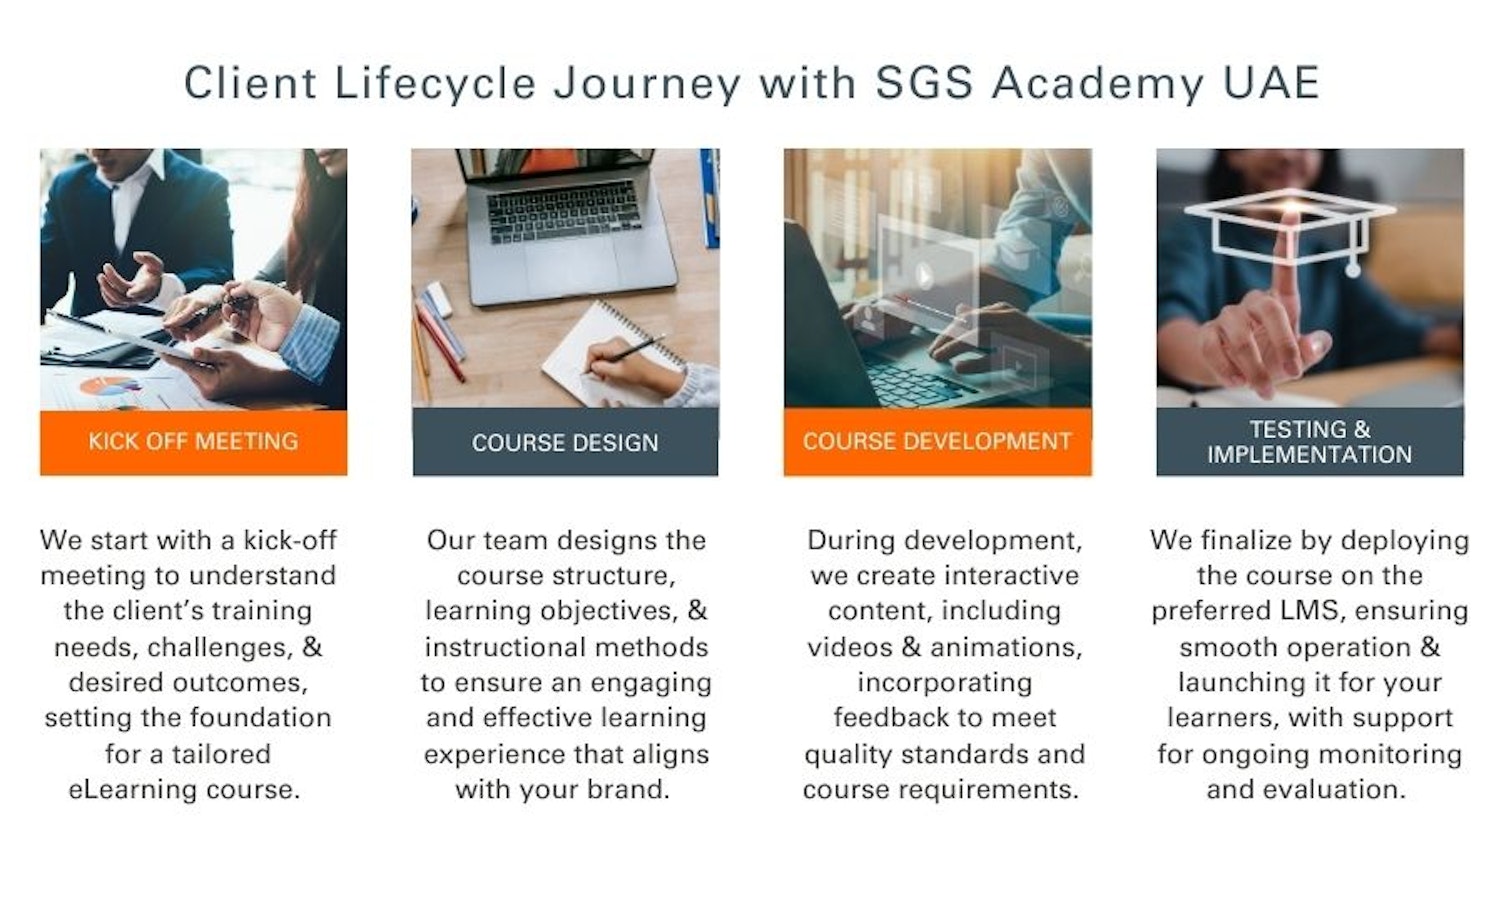 client lifecycle at sgs academy uae